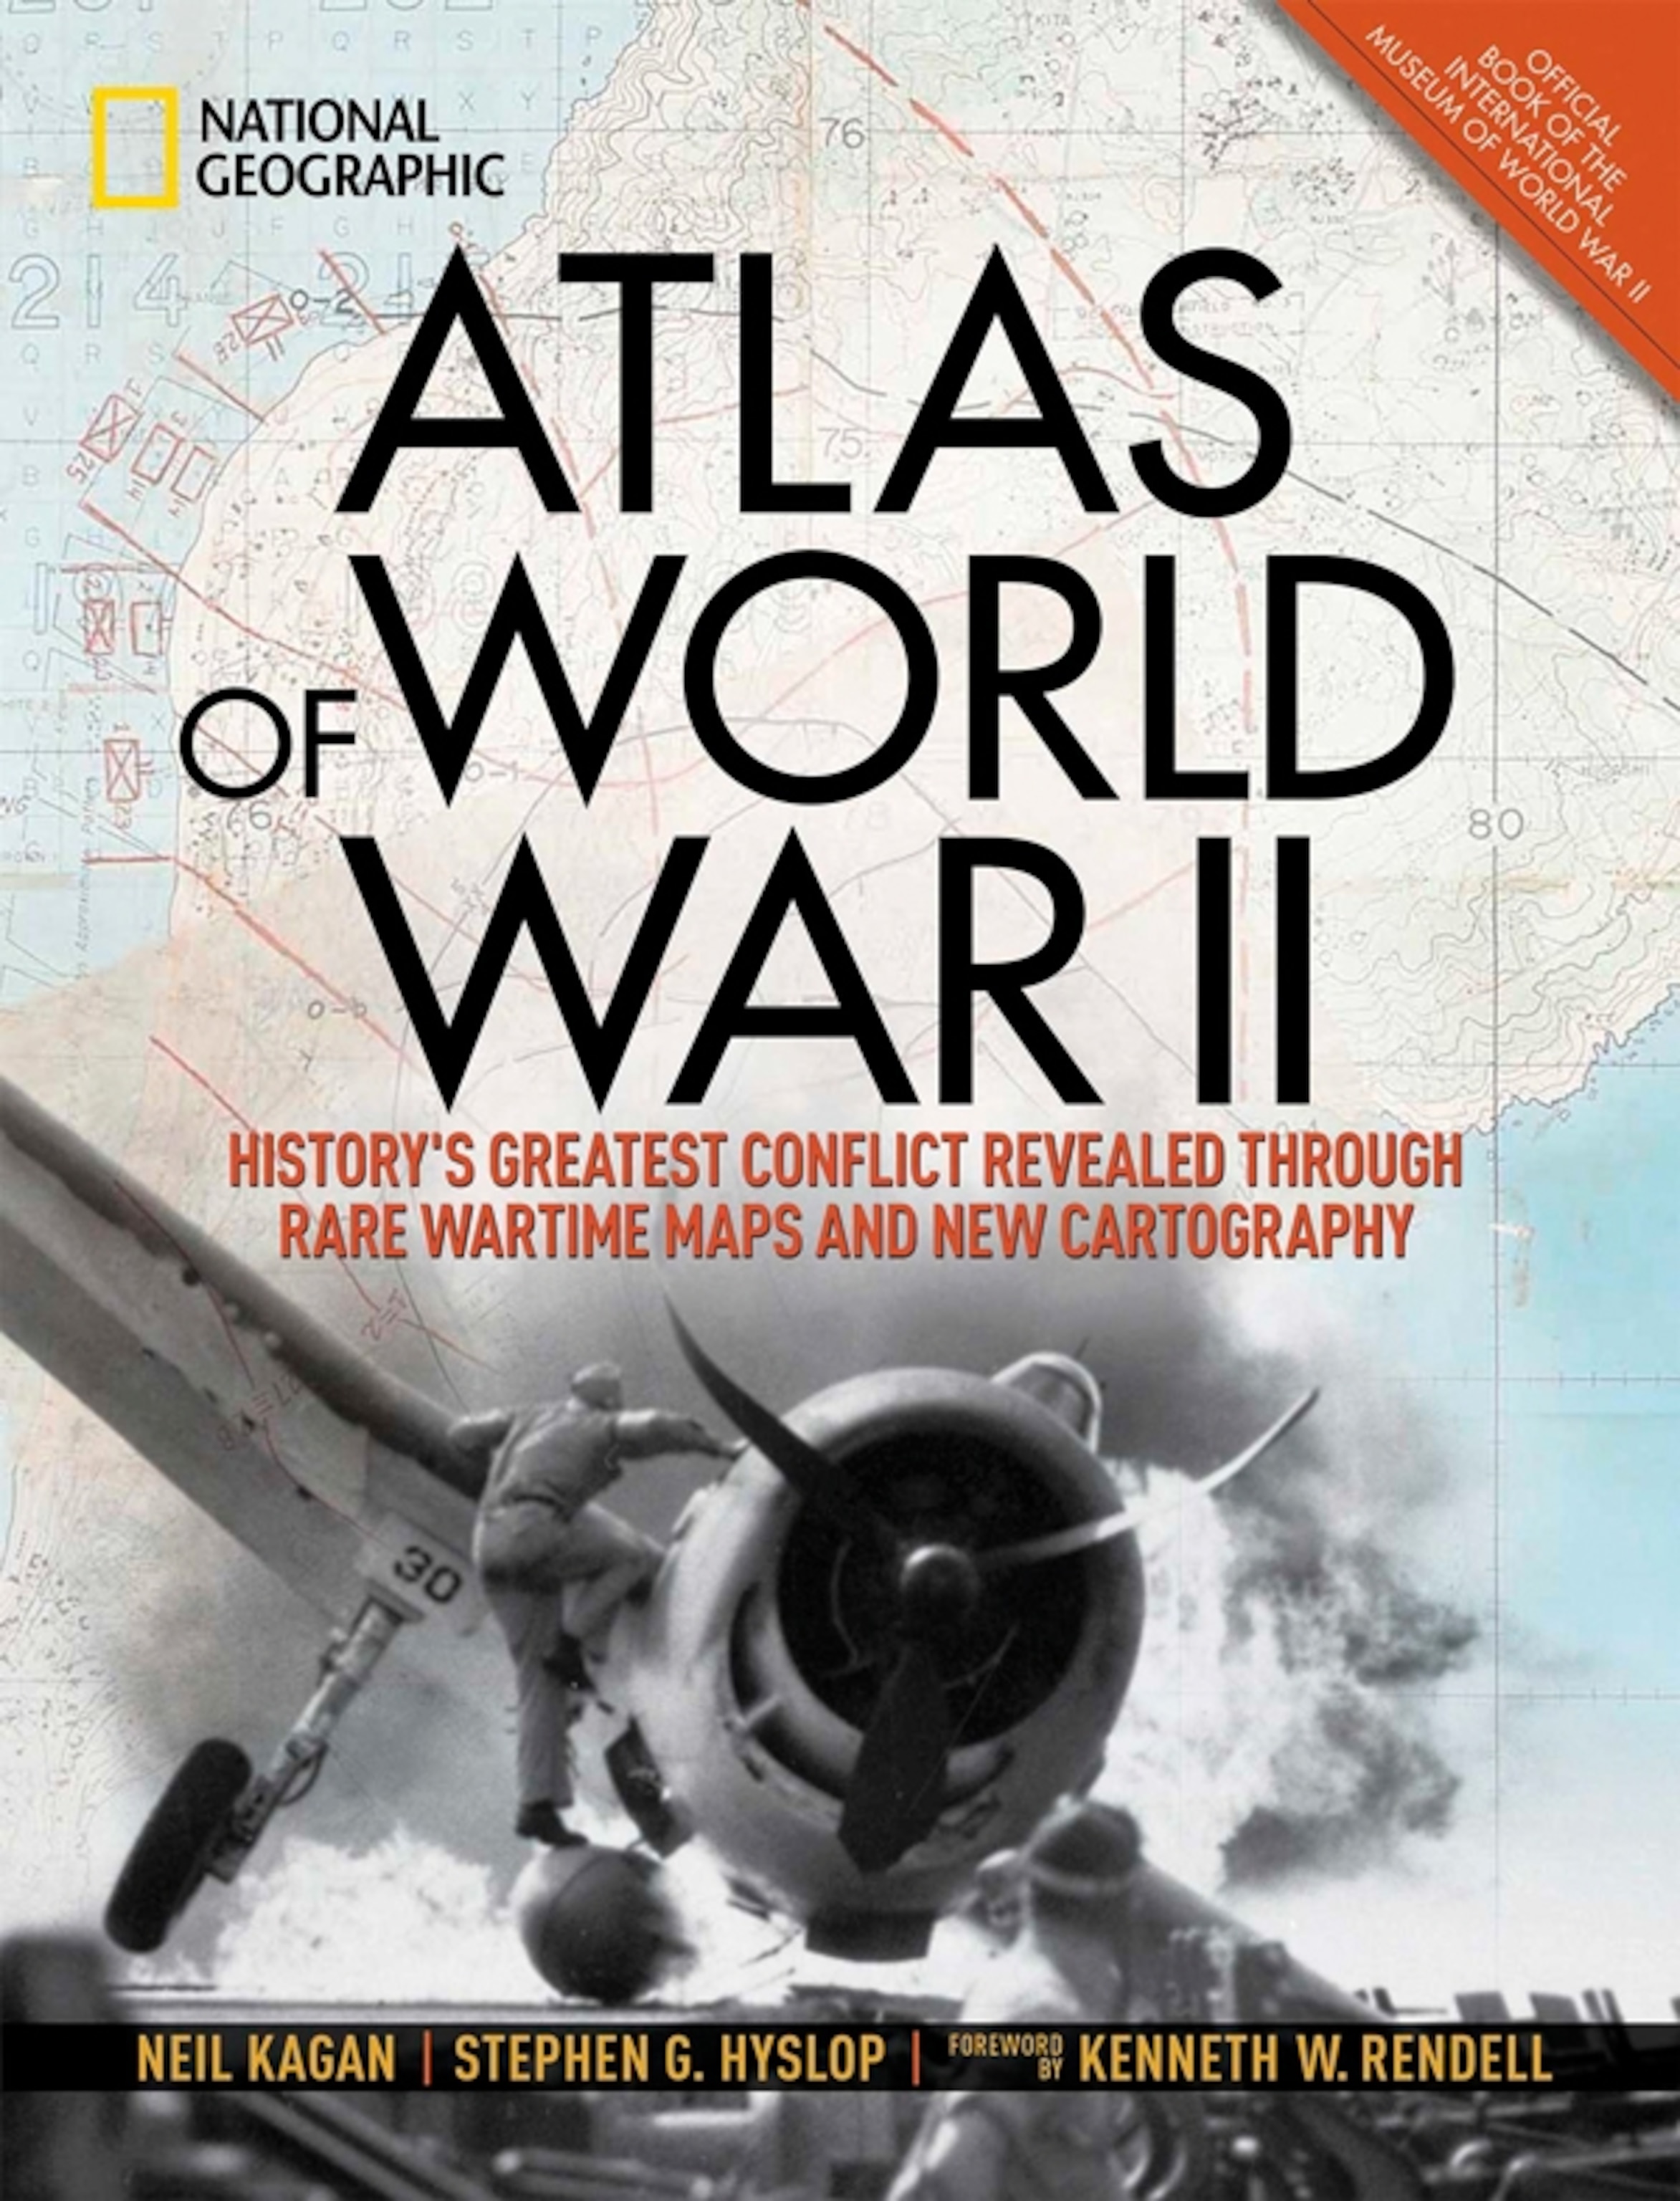 the National Geographic book Atlas of World War II